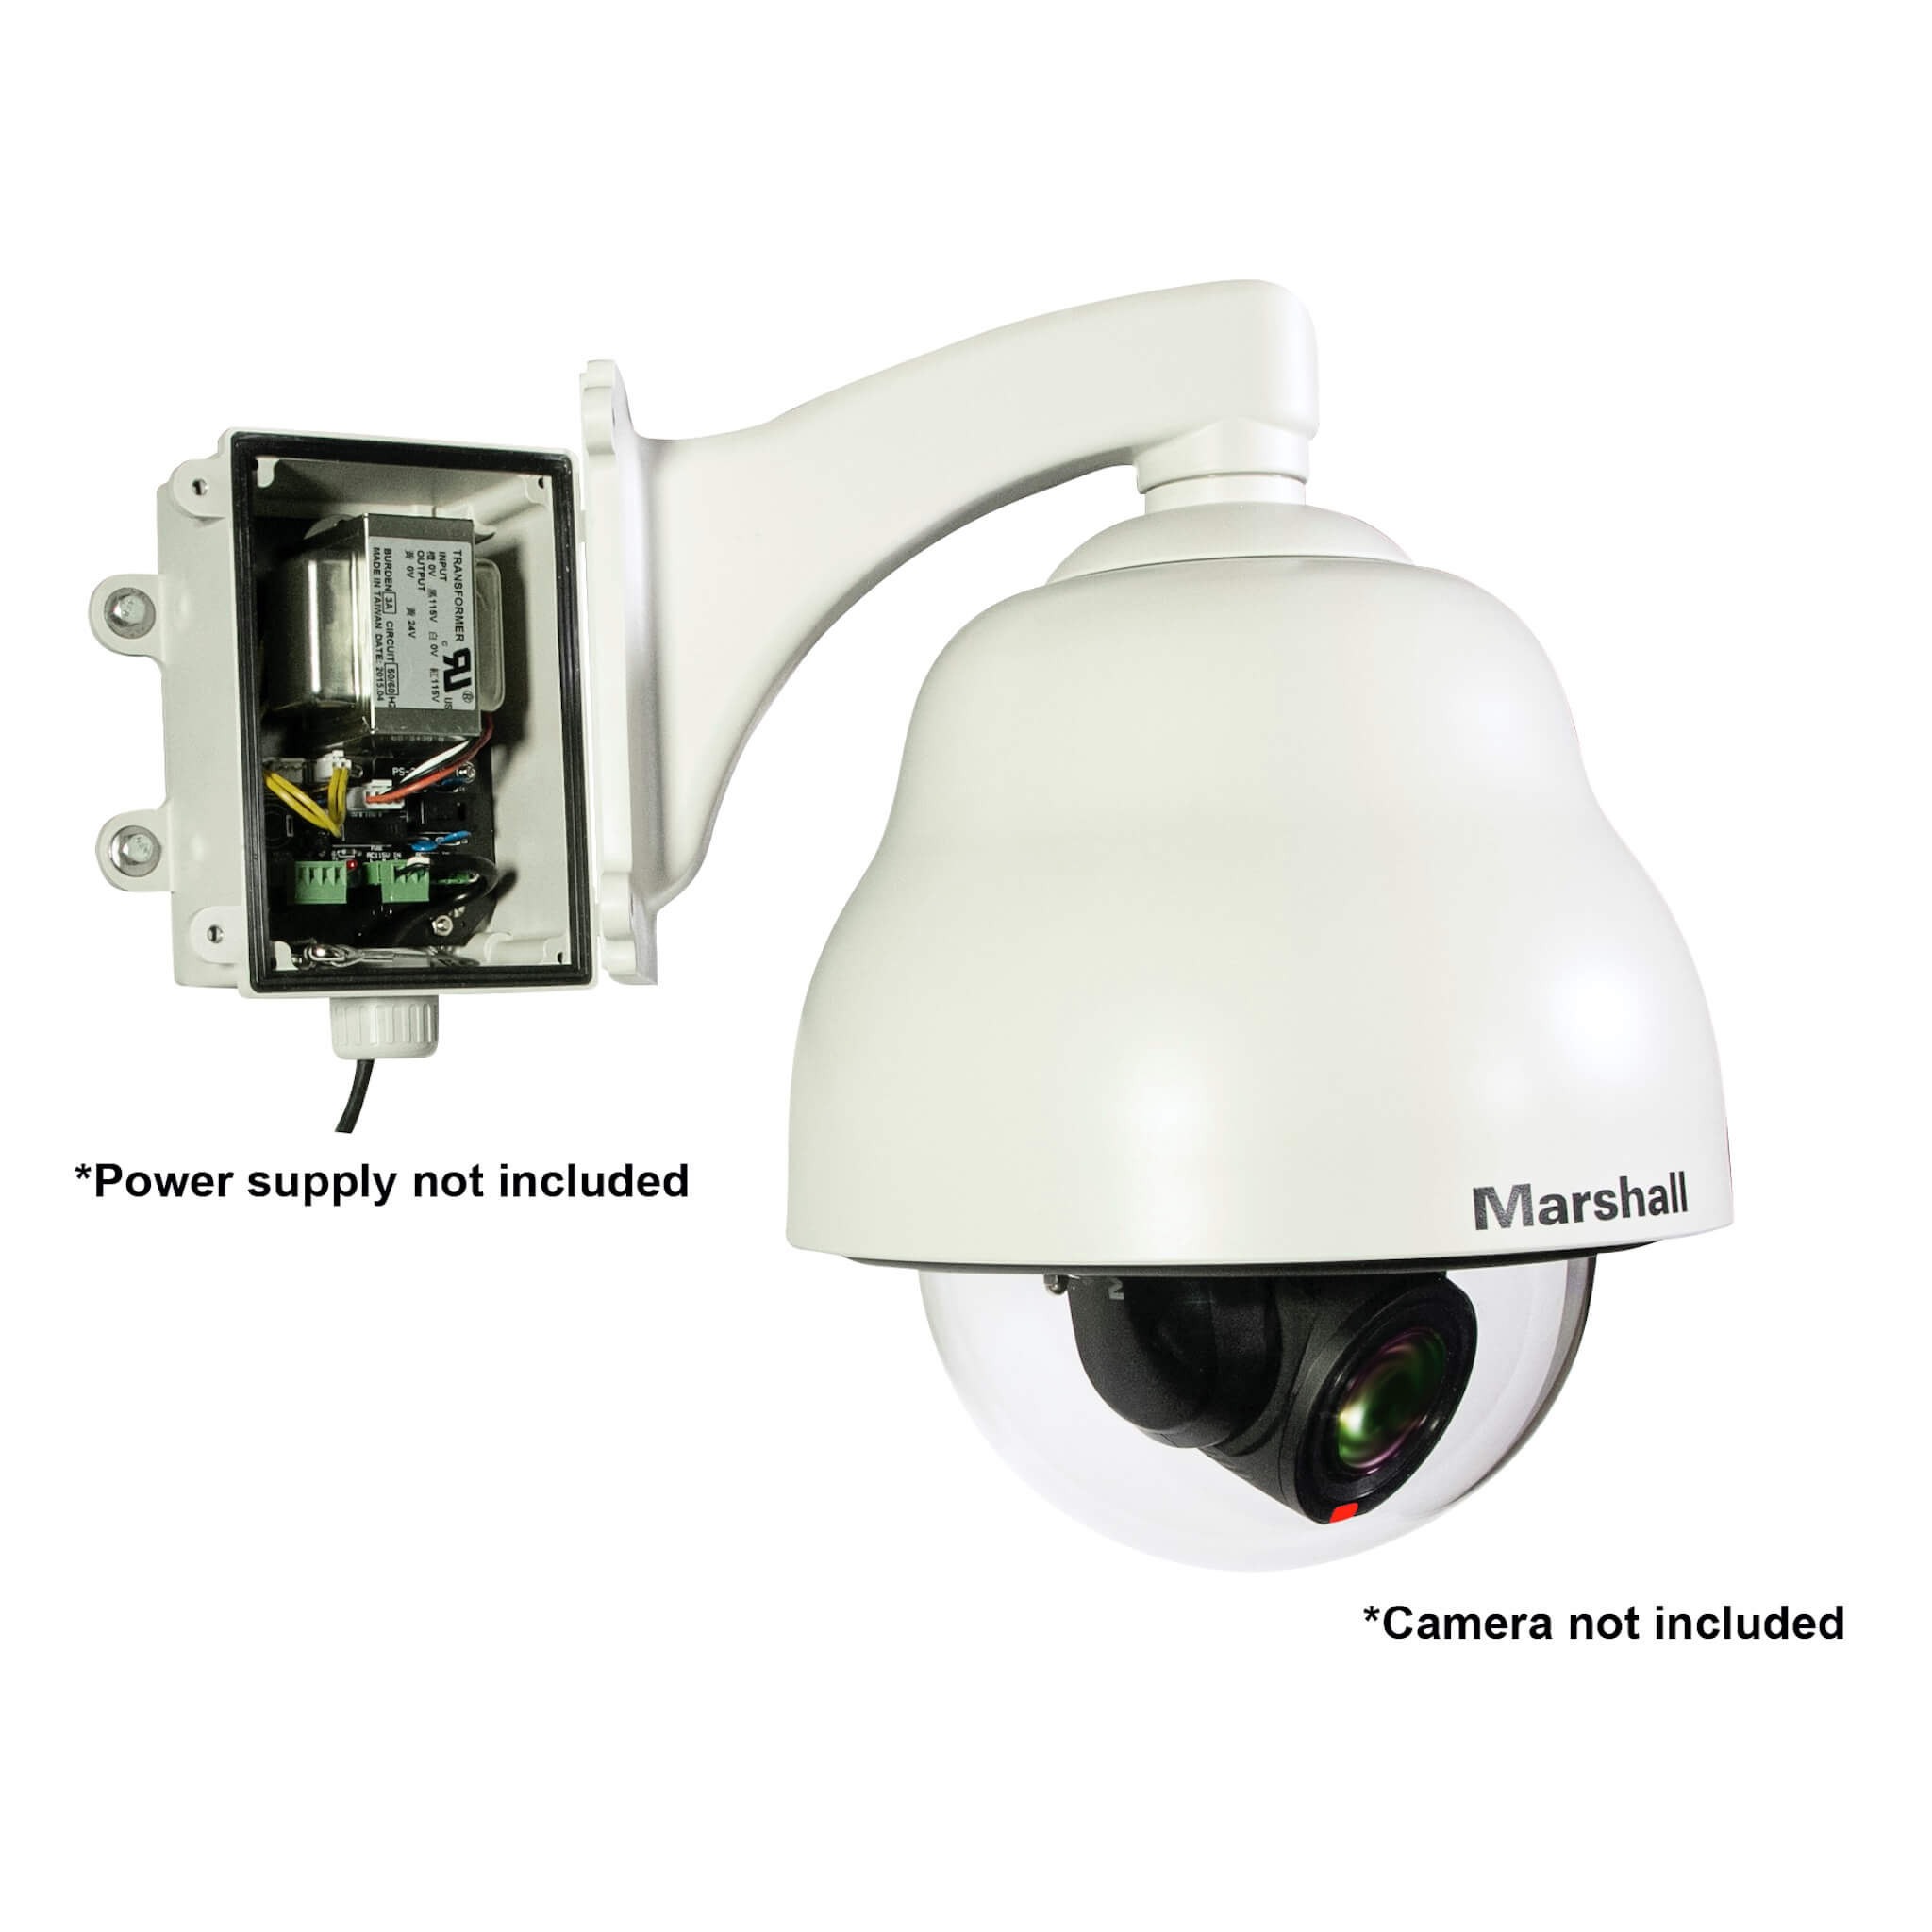 Marshall CV6XX-DH - Outdoor Dome Housing for PTZ Cameras, electric box